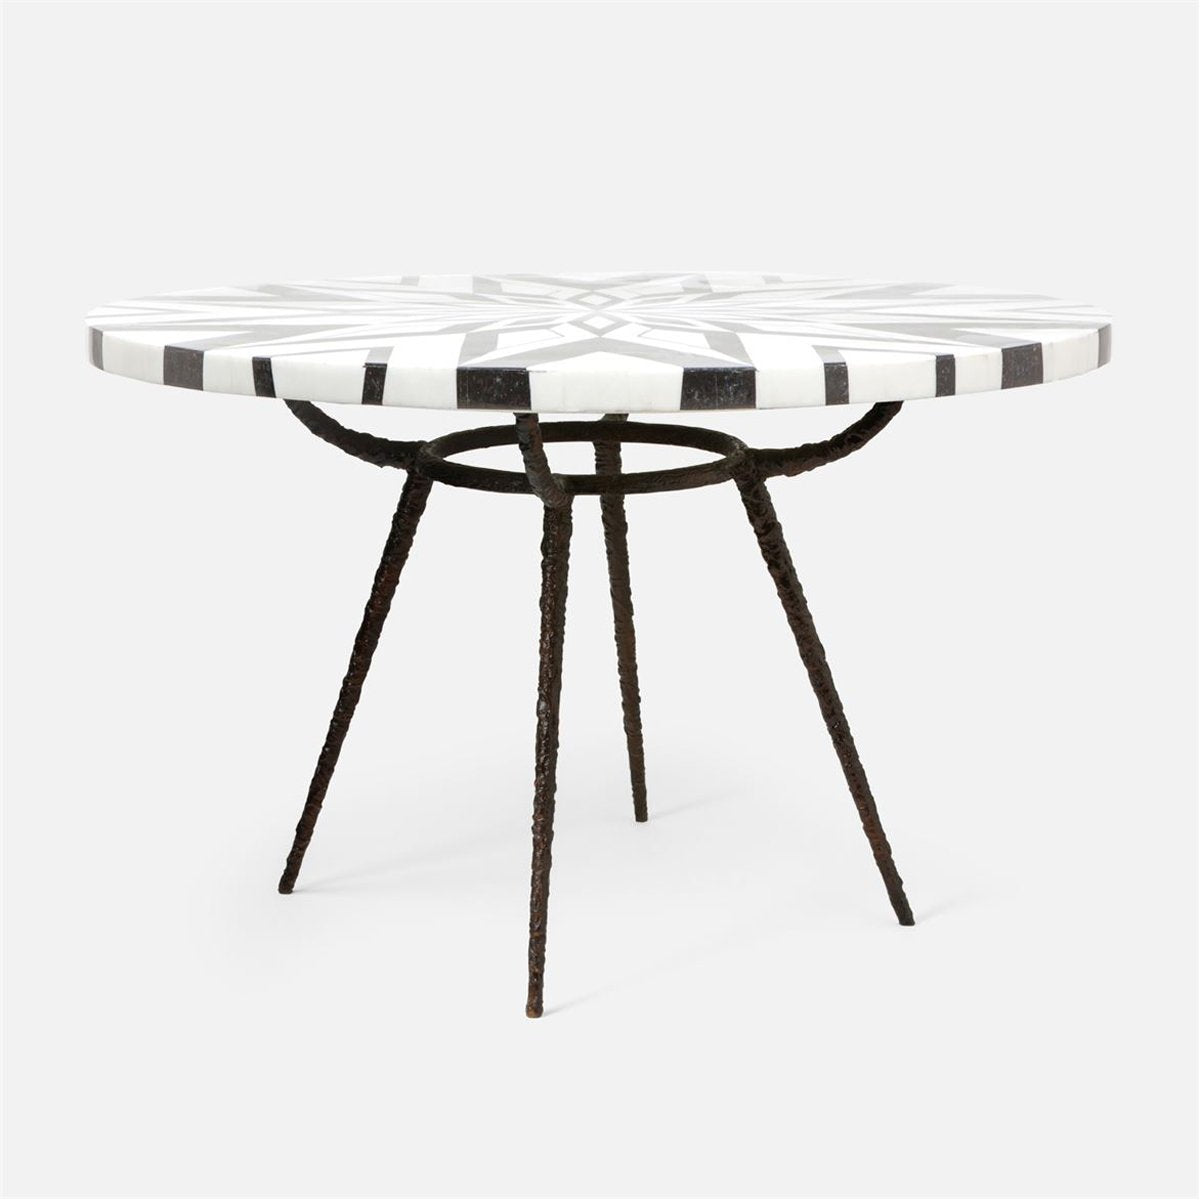 Made Goods Grace Pitted Iron Dining Table in Black/White Geometric Marble